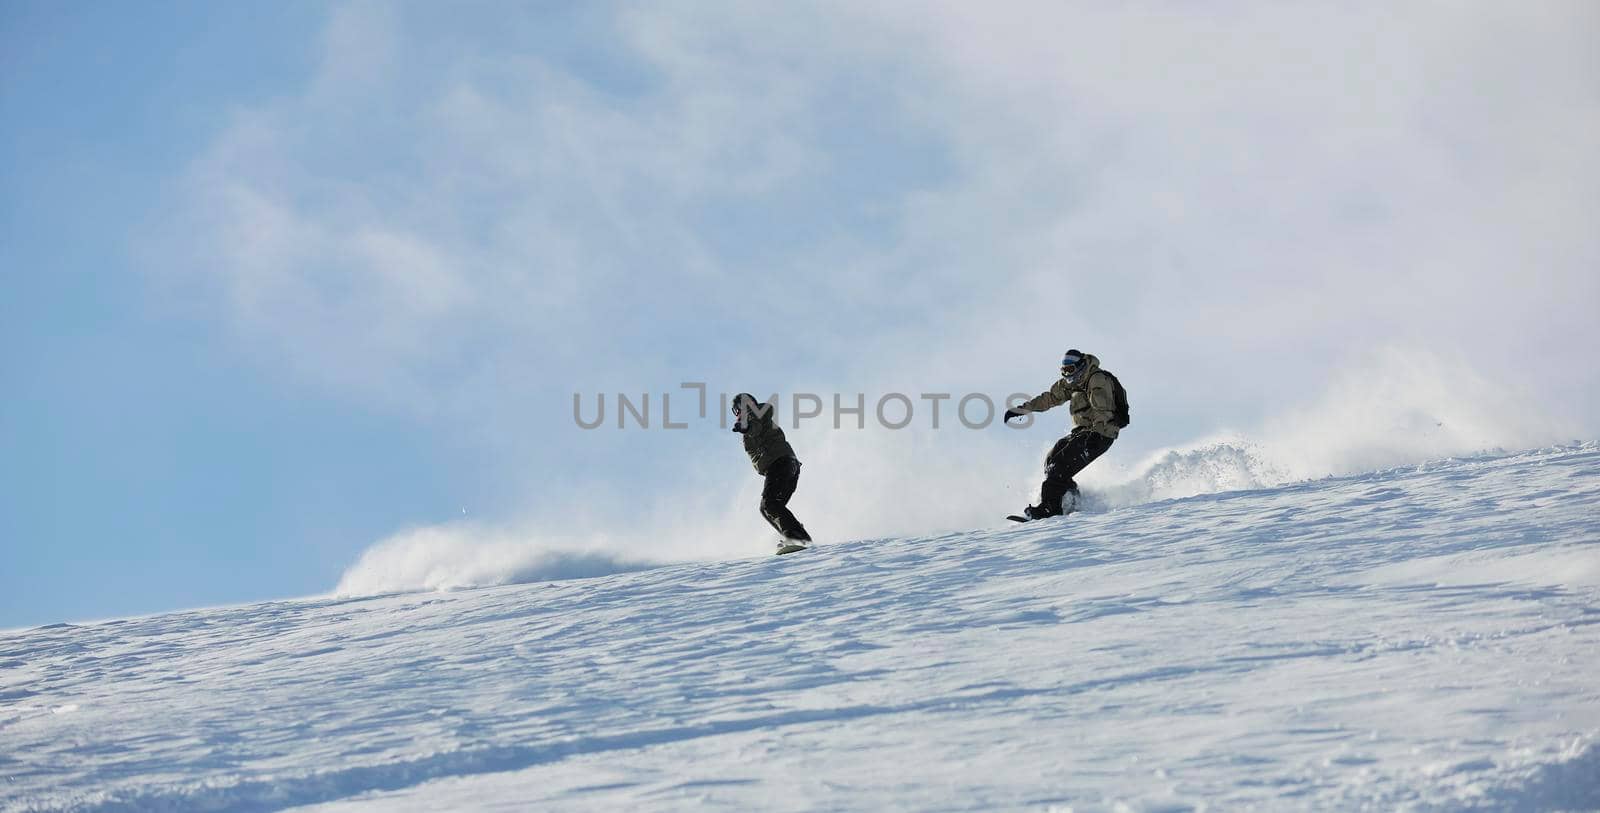 freestyle snowboarder jump and ride by dotshock